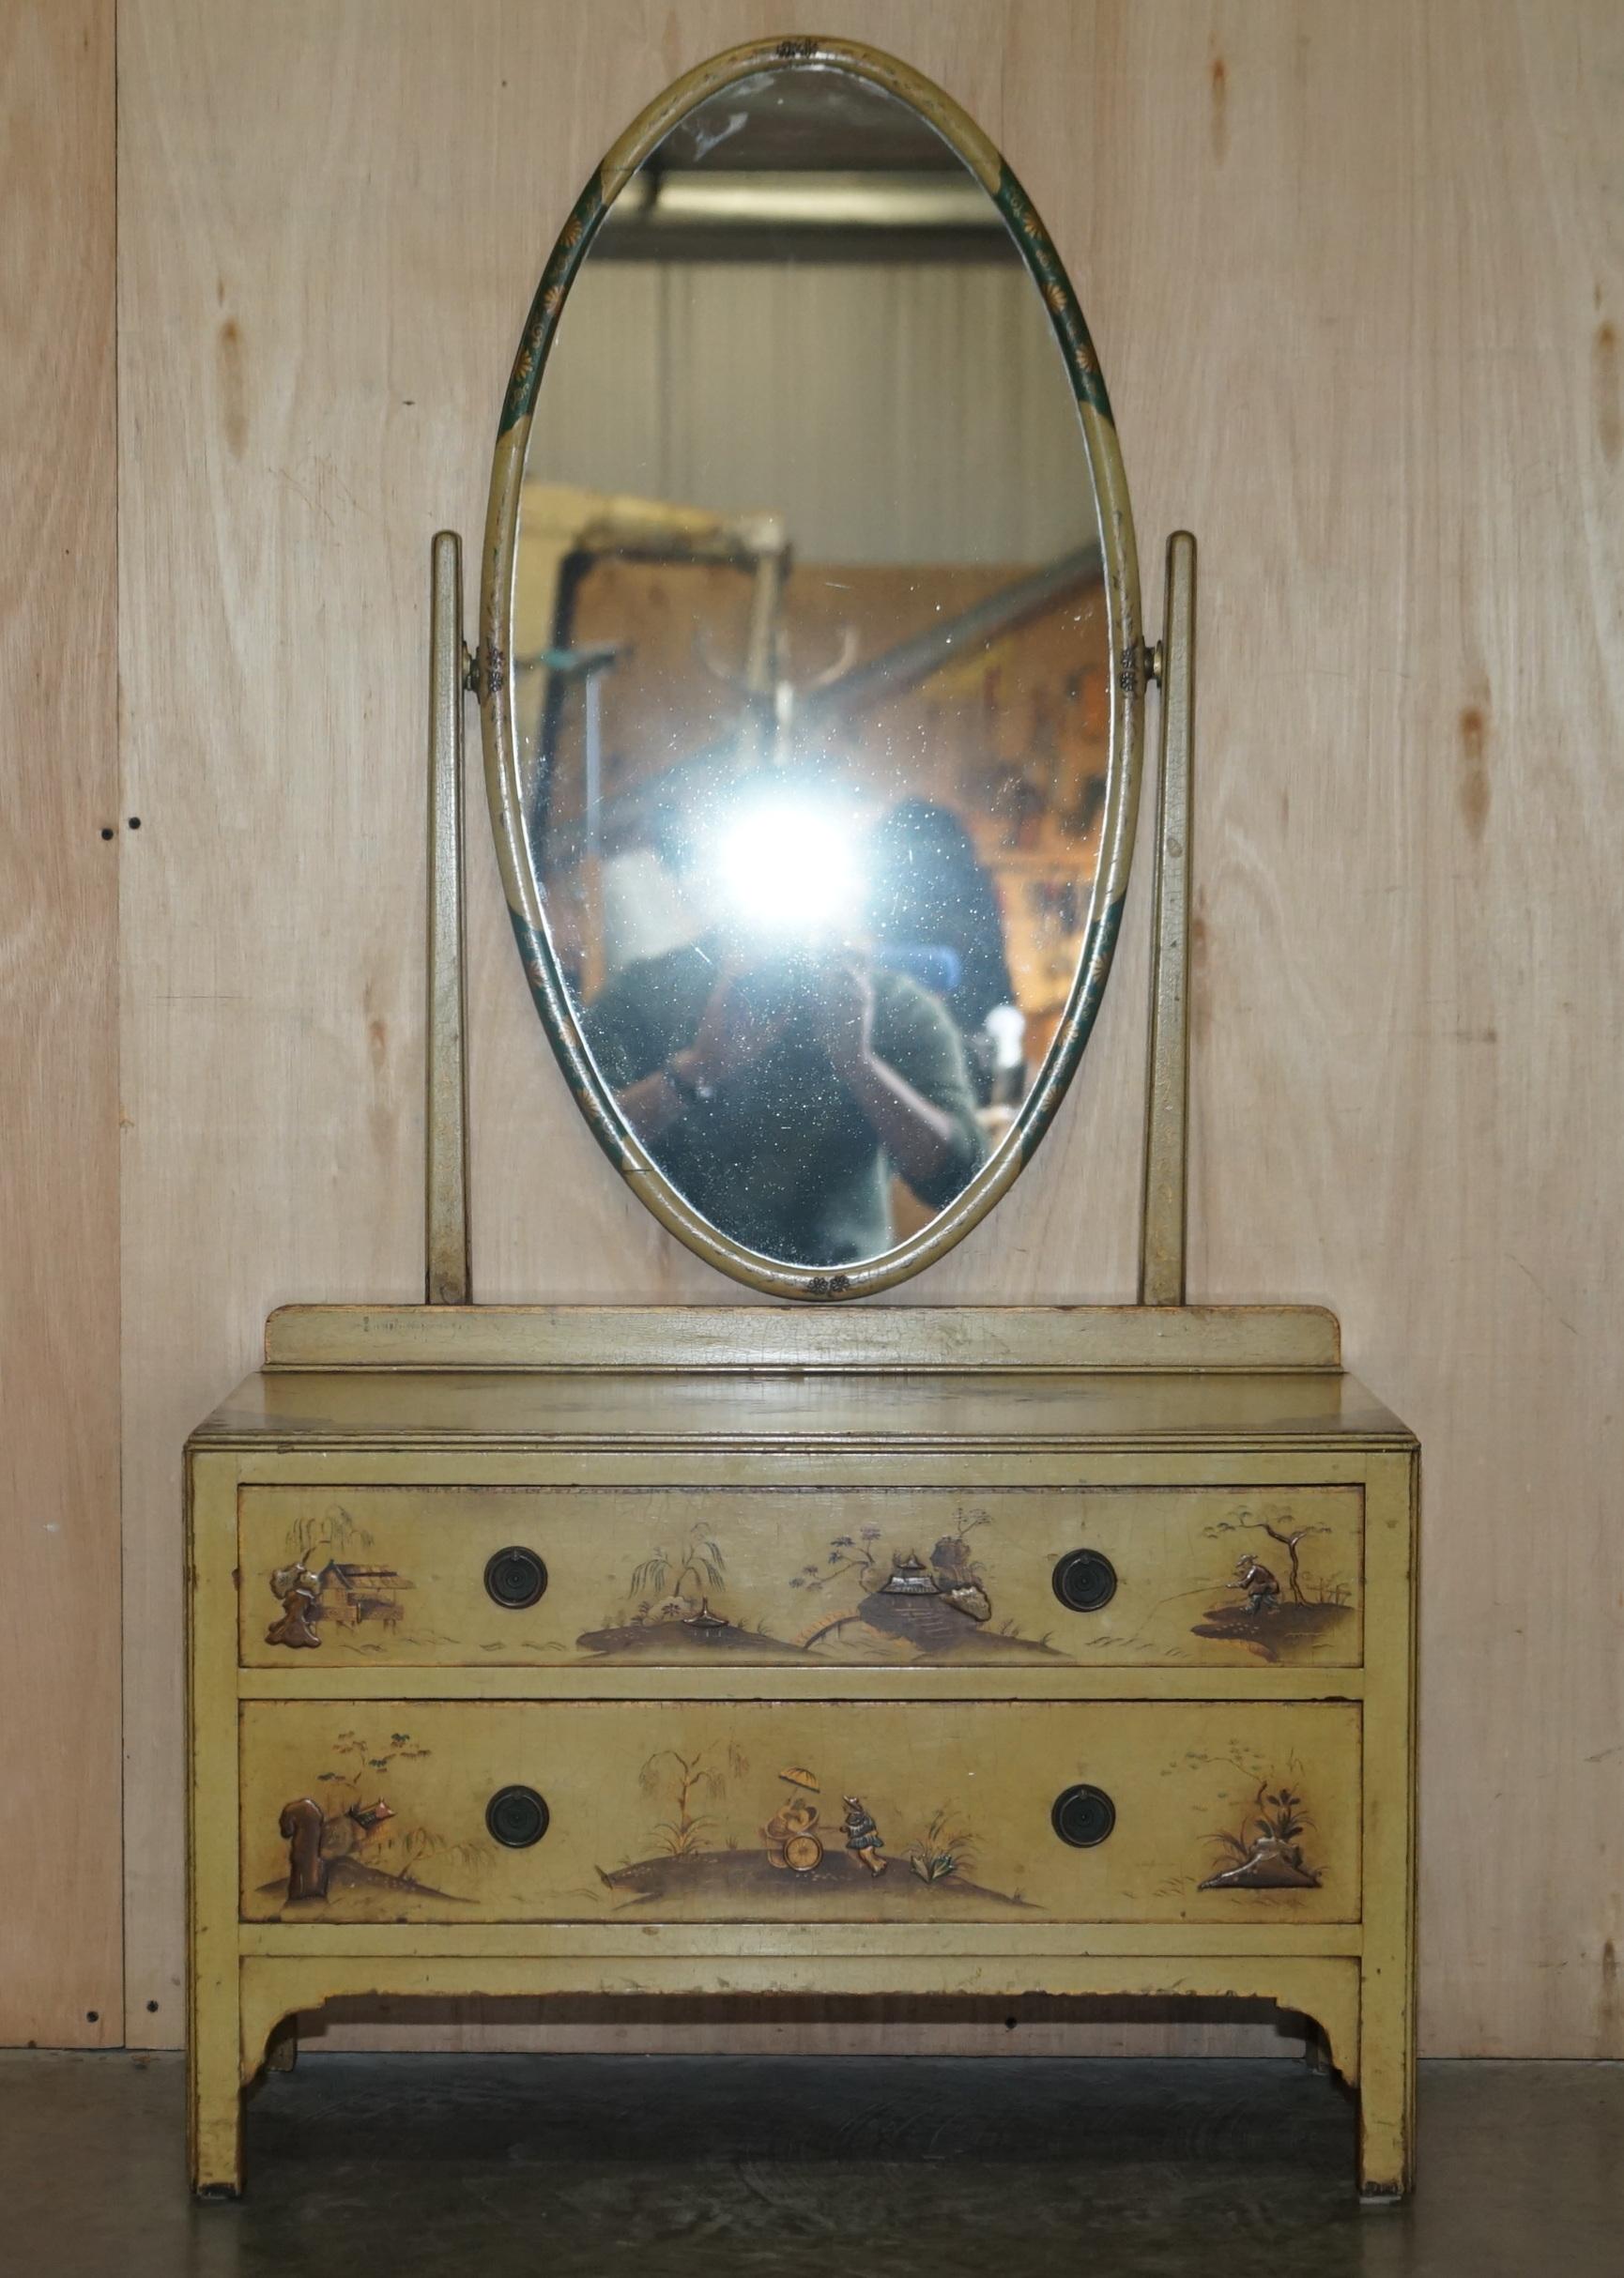 We are delighted to offer for sale this stunning original Chinese hand painted with Pagoda's, oak chest of drawers with mirror in the style of a Edwardian Dressing table.

A very good looking and highly decorative piece. It is based on an early